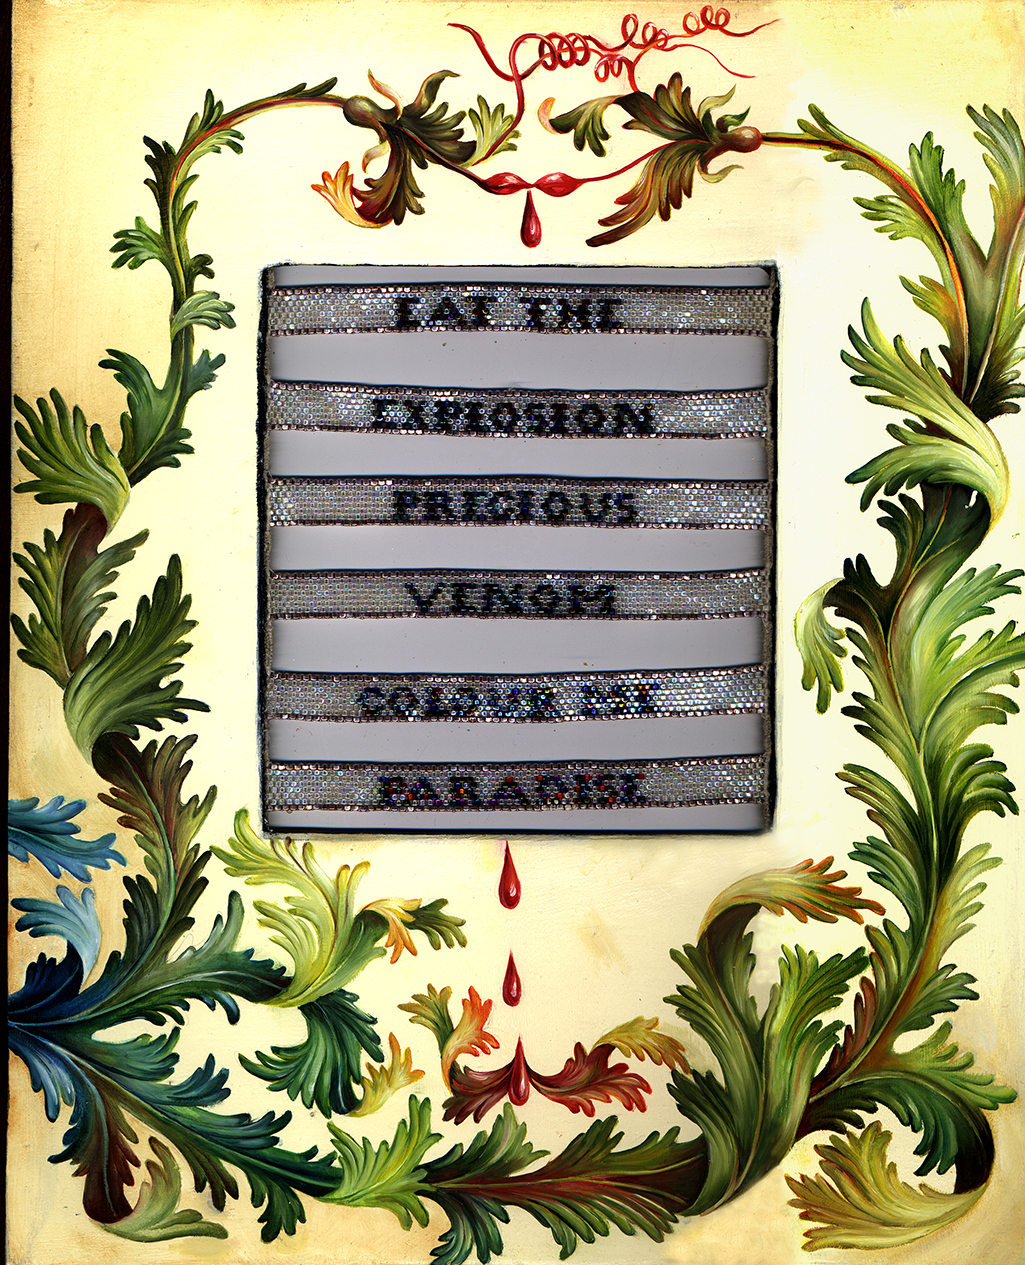 cathy weber - art - painting - woman - oil - montana - painting - poem - object - stone - pansy bradshaw, - 4 sex werks - bead - dragon - poetry